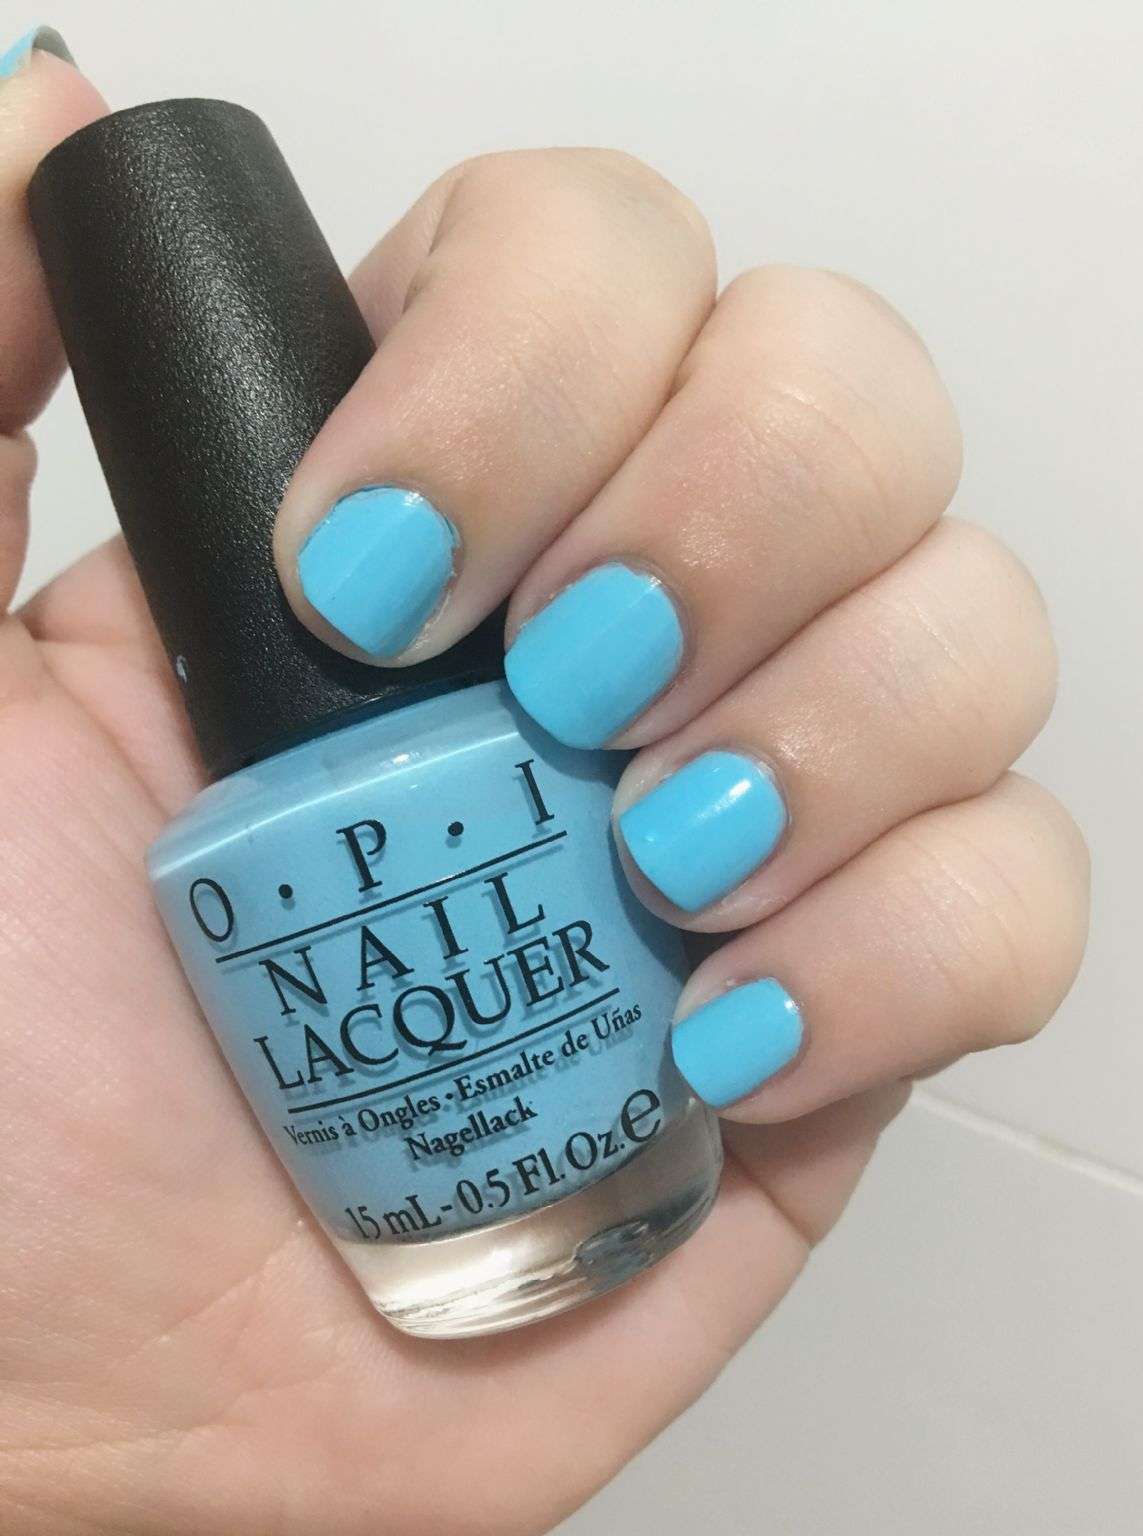 OPI I Believe In Manicures reviews, photos, ingredients